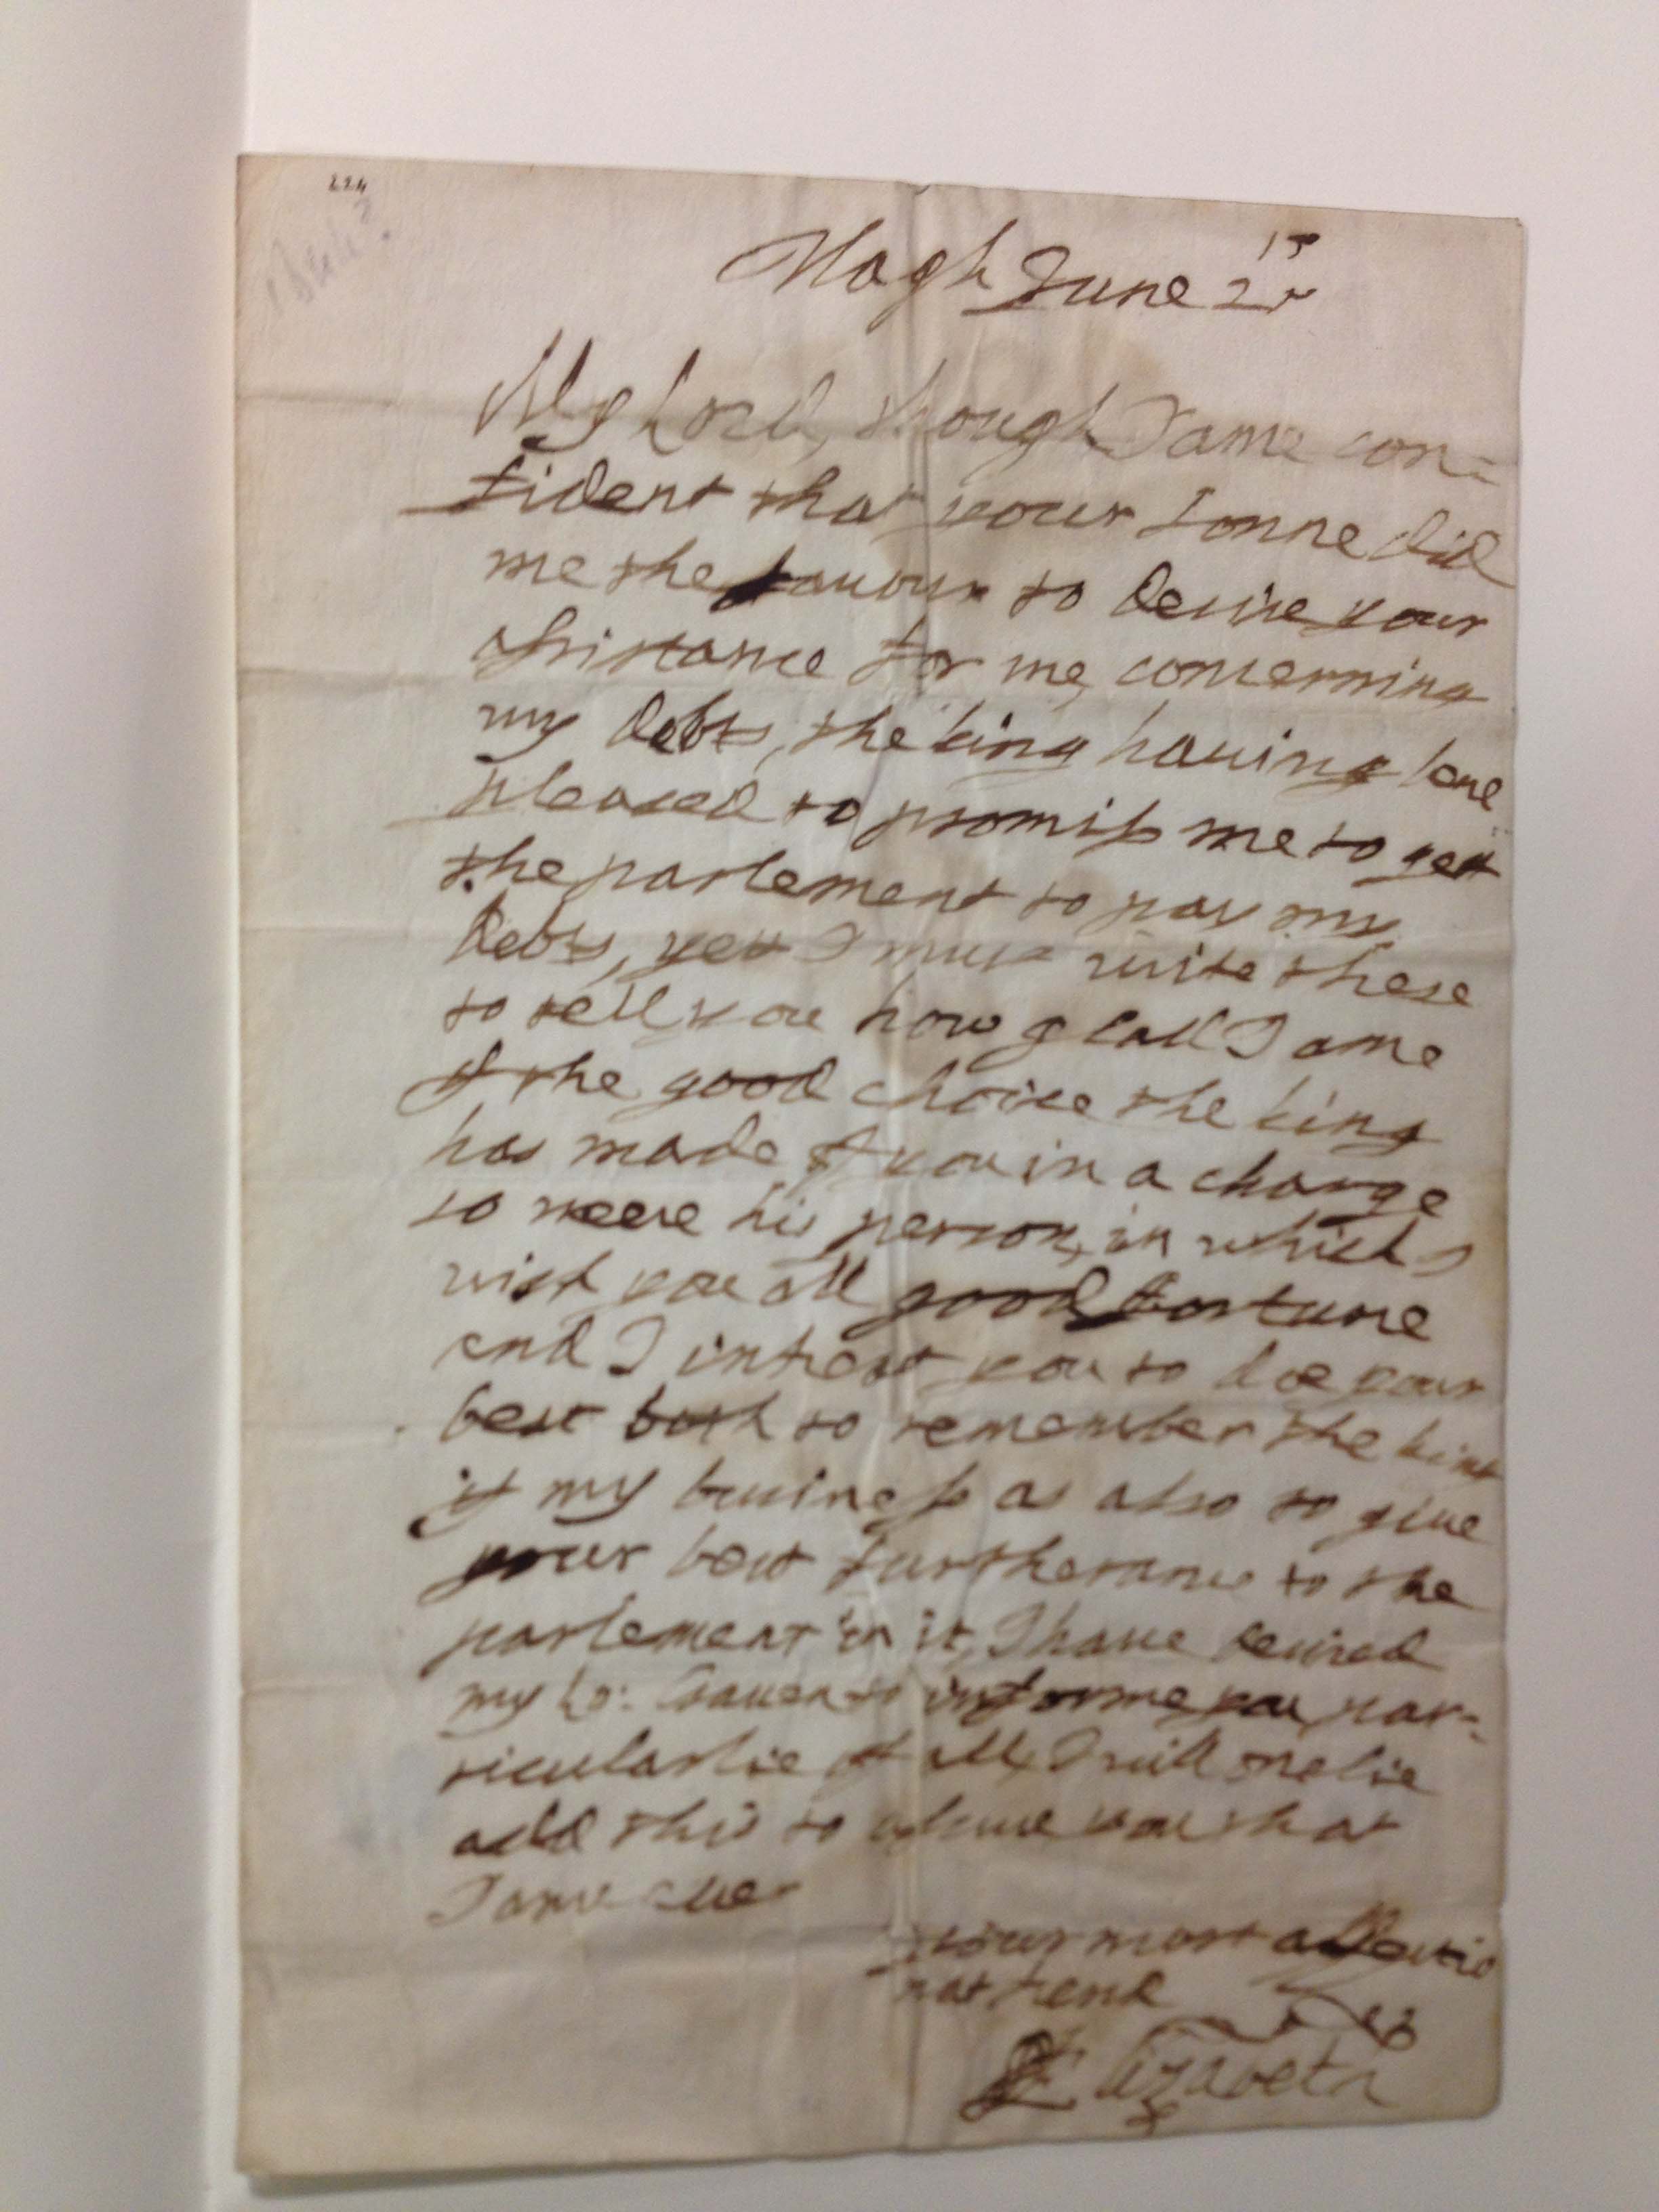 Queen Elizabeth 1660 letter to the Earl of Manchester at the Newberry Library